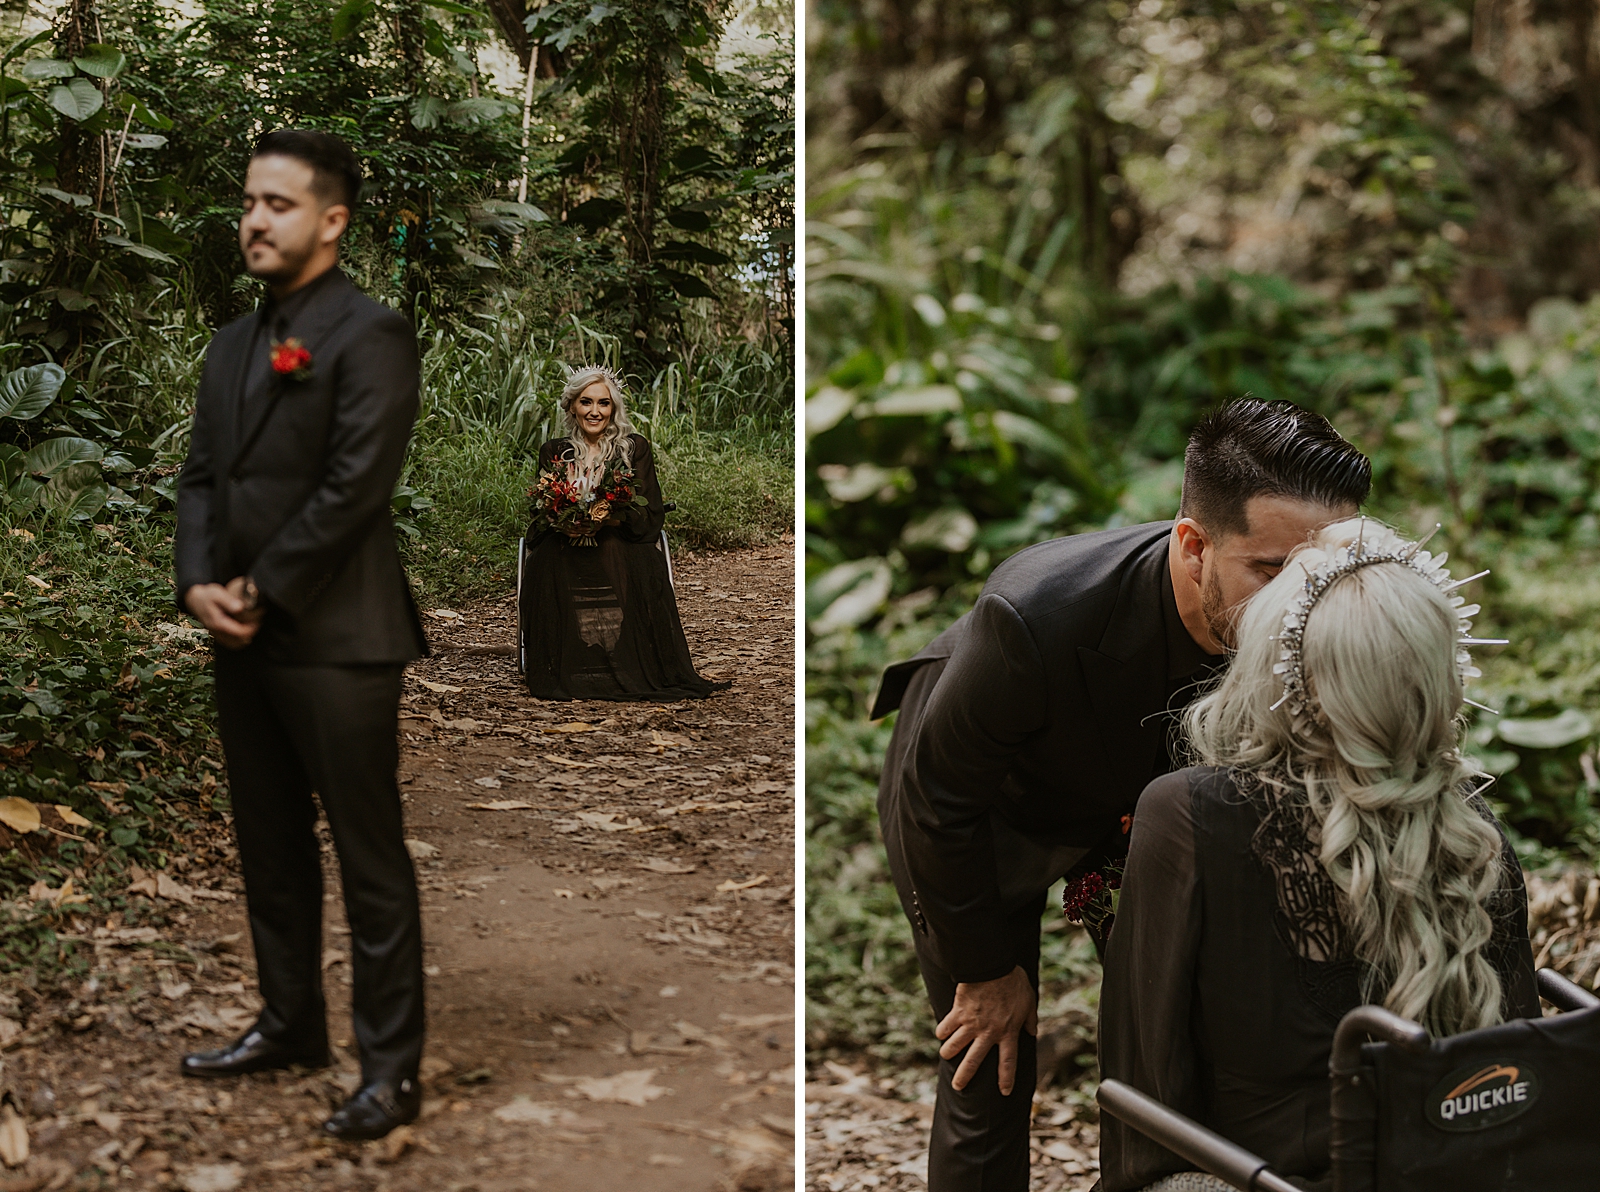 First Look of Bride in wheel chair approaching Groom with back turned on dirt trail surrounded by greenery